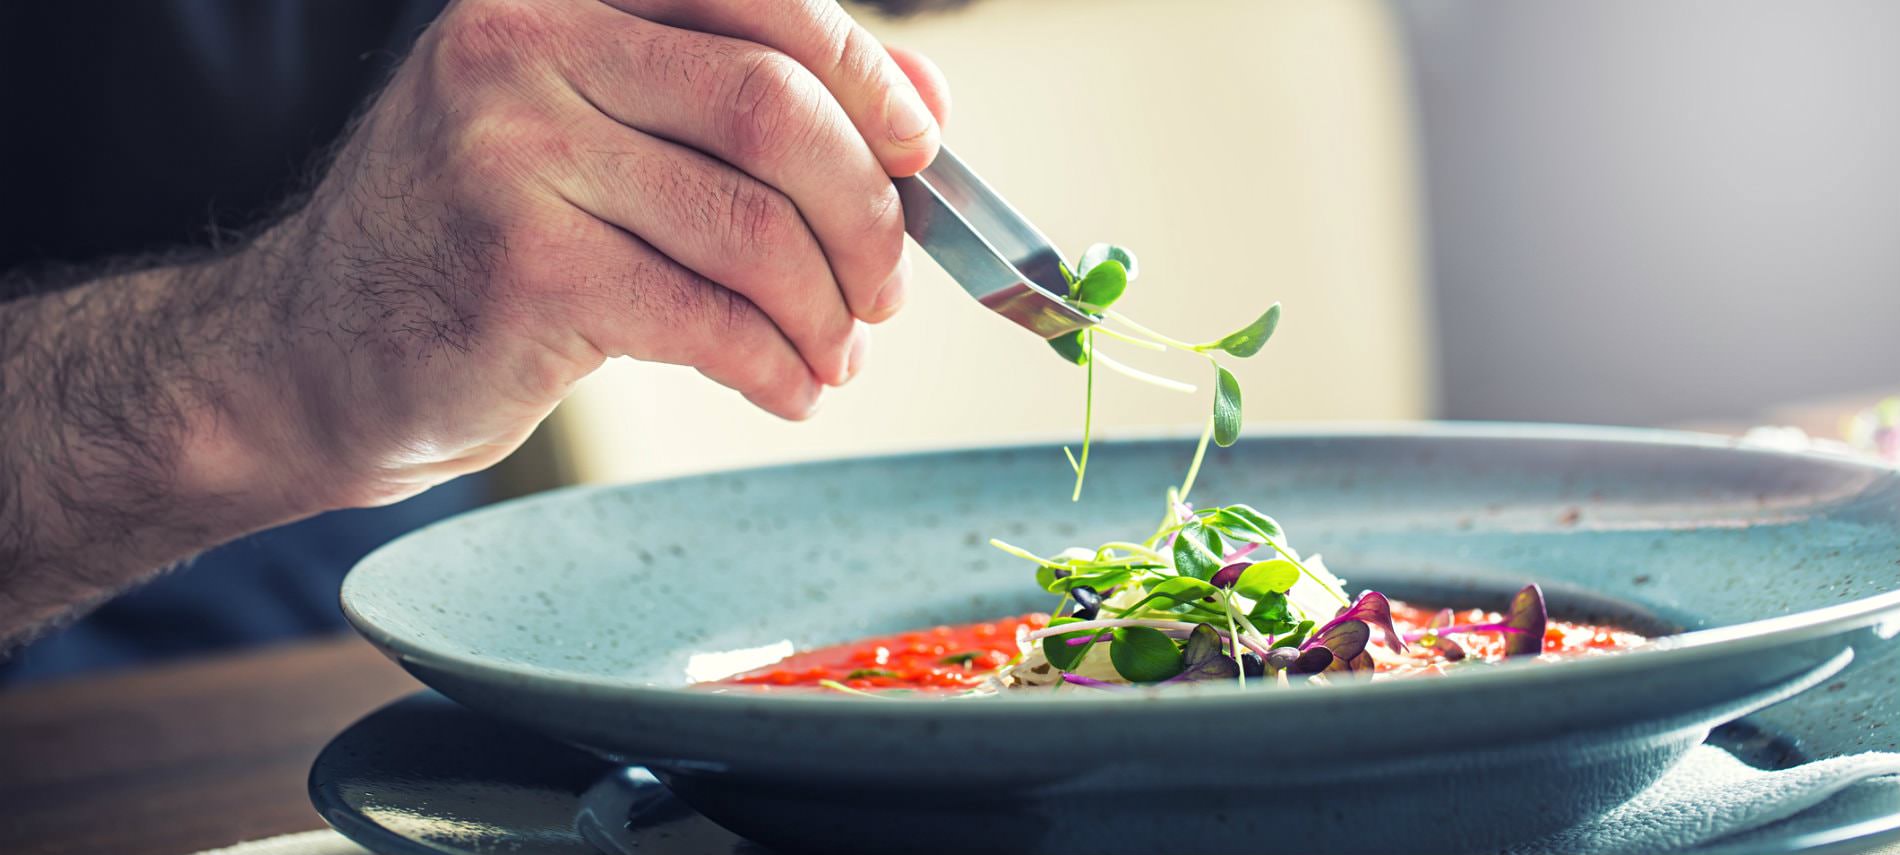 Man's hand holding silver tongs placing fresh herbs on homemade soup in a turquiose bowl